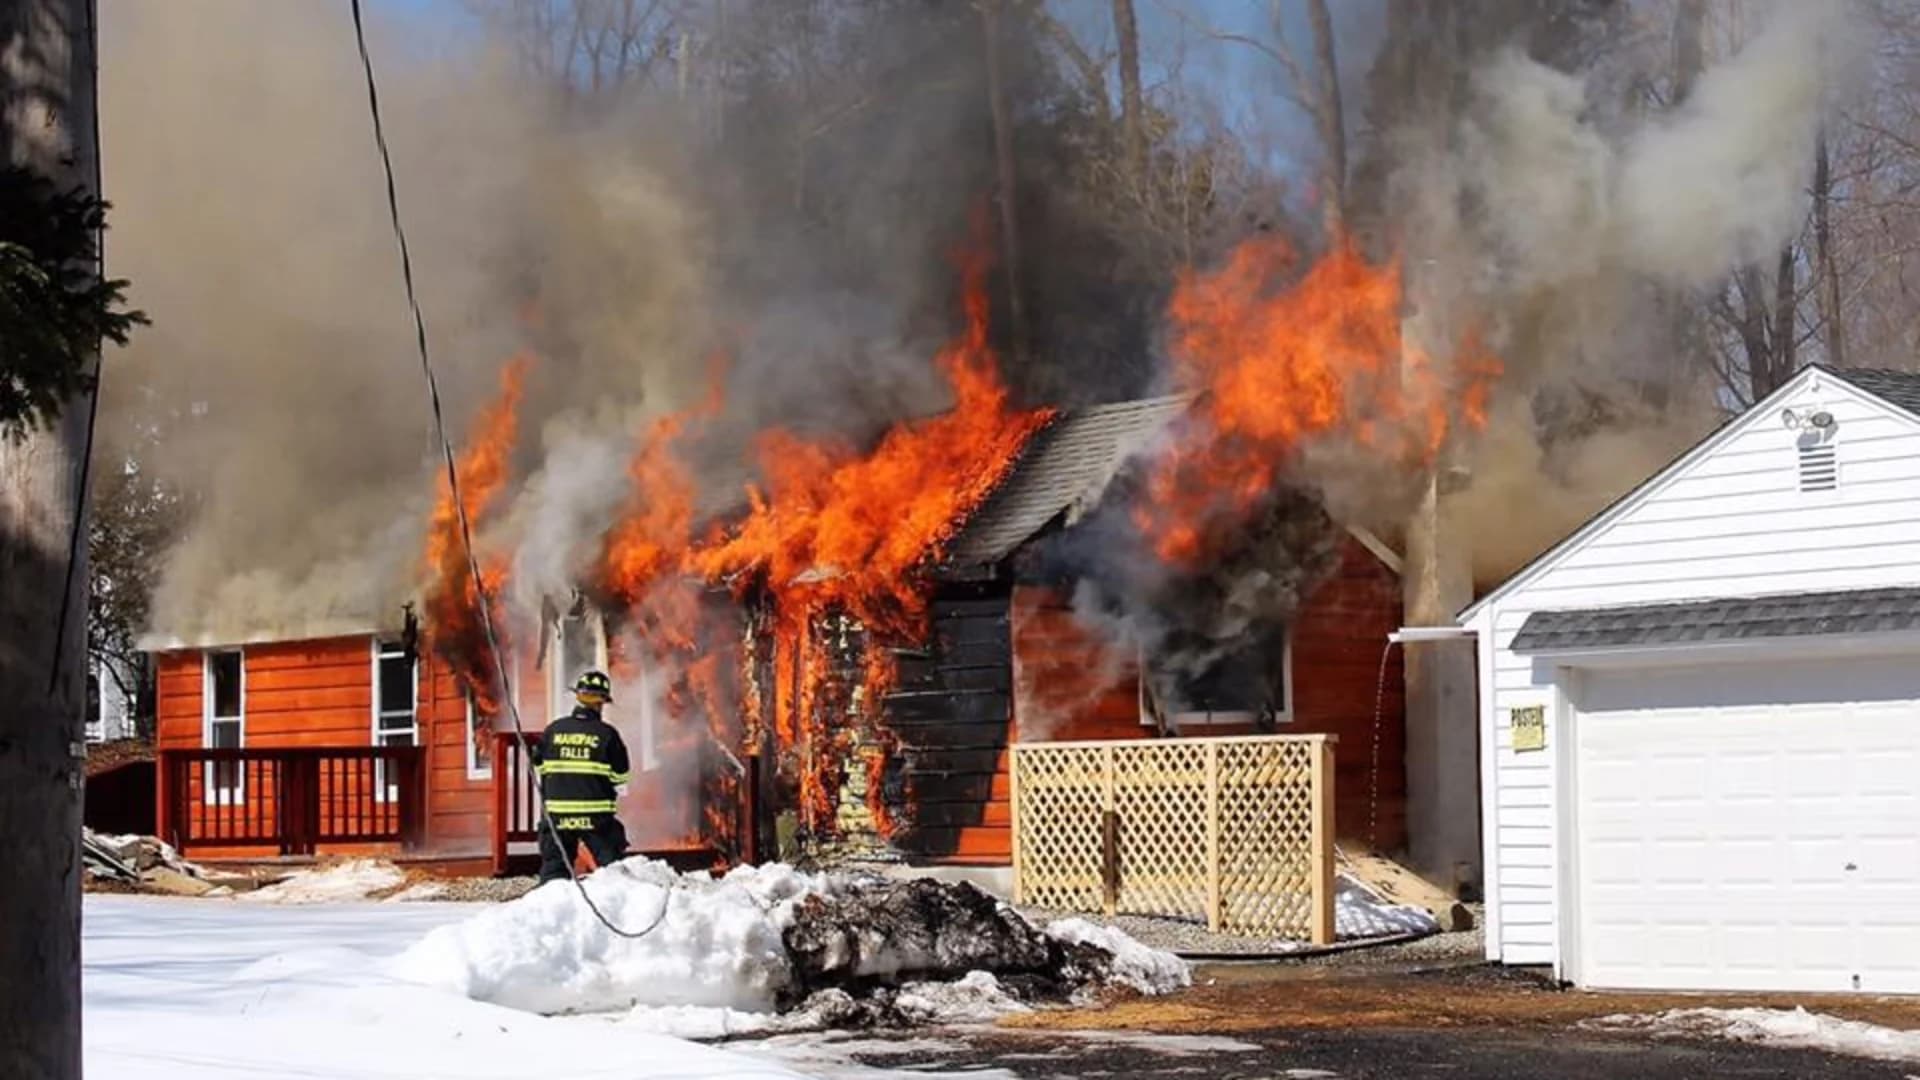 Fire rages at home in Mahopac